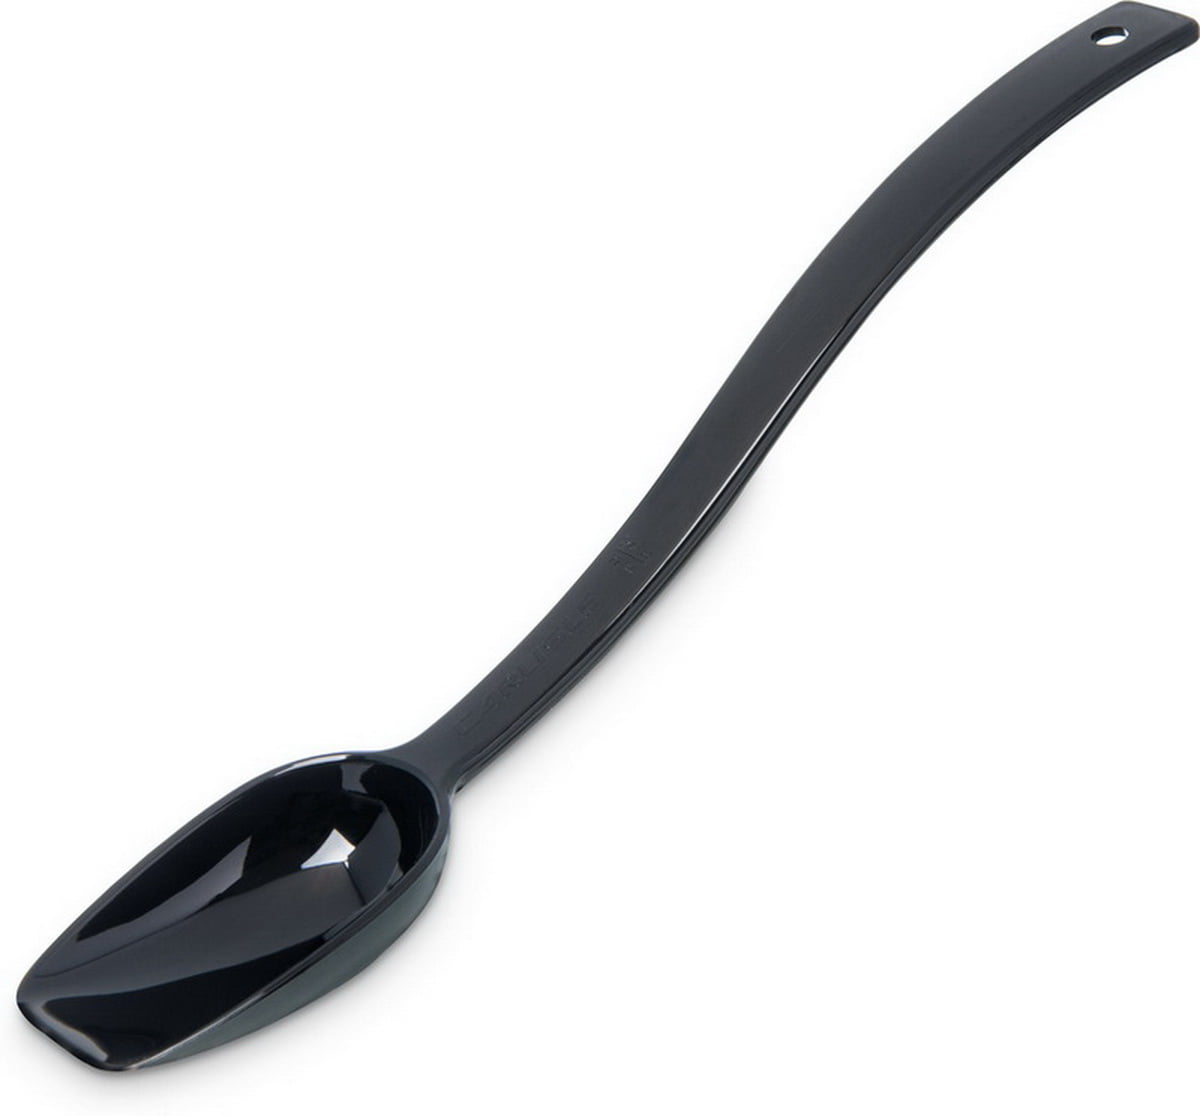 10 0.75 oz Pack of 12 Solid Polycarbonate Black Excellante Buffet Spoon 